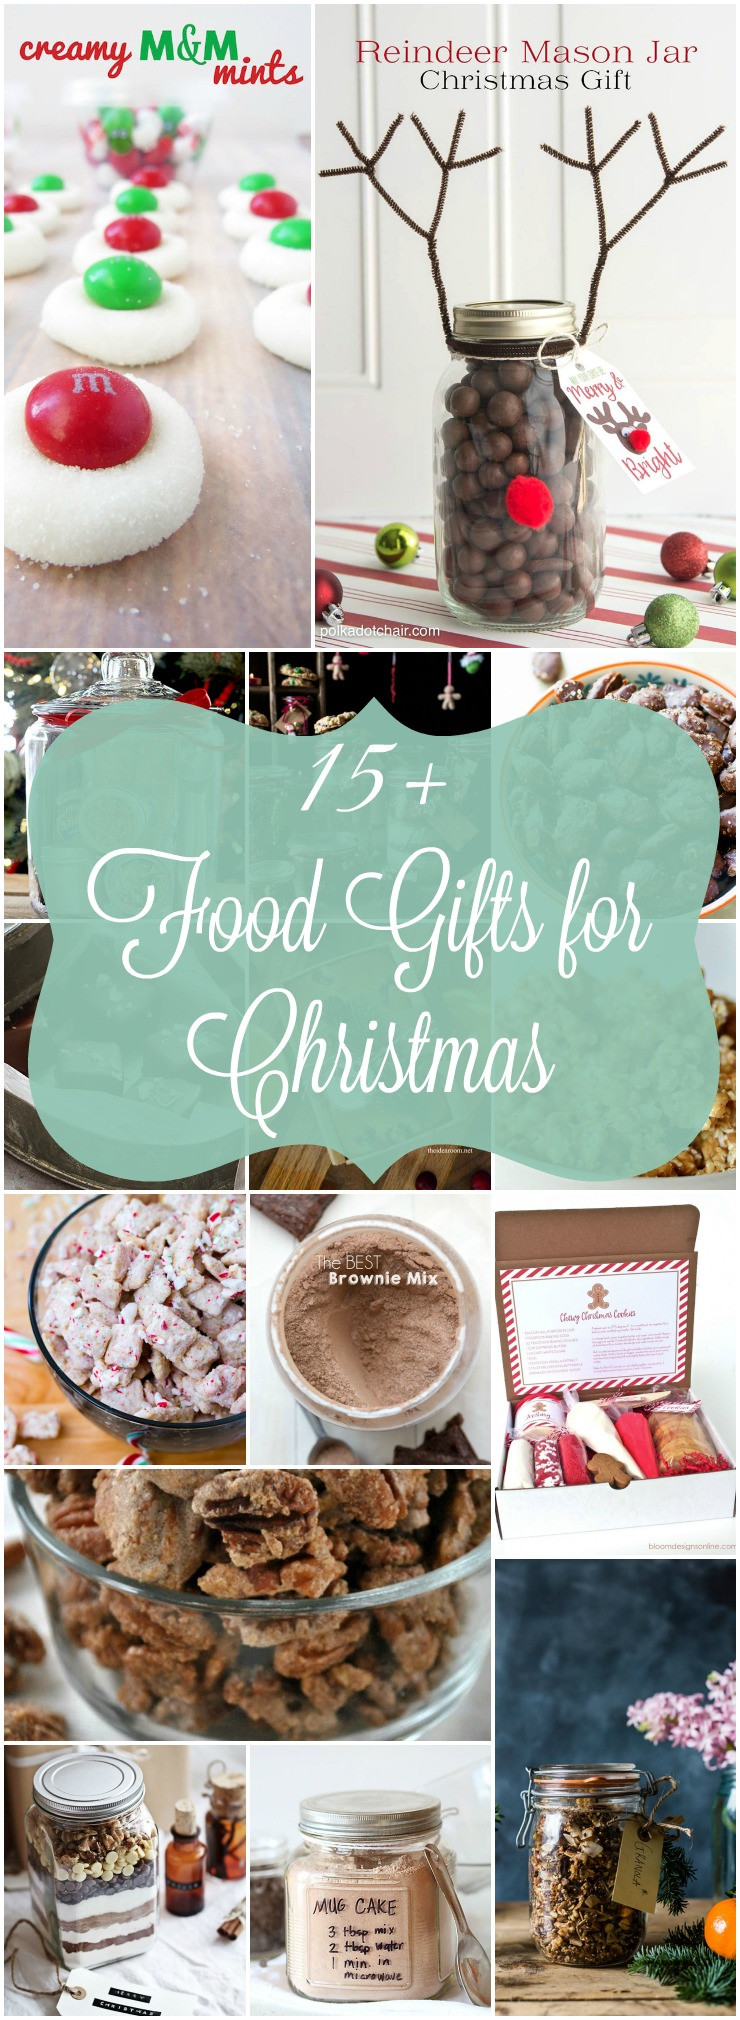 Best Food Gifts For Christmas
 Homemade Food Gifts for Christmas